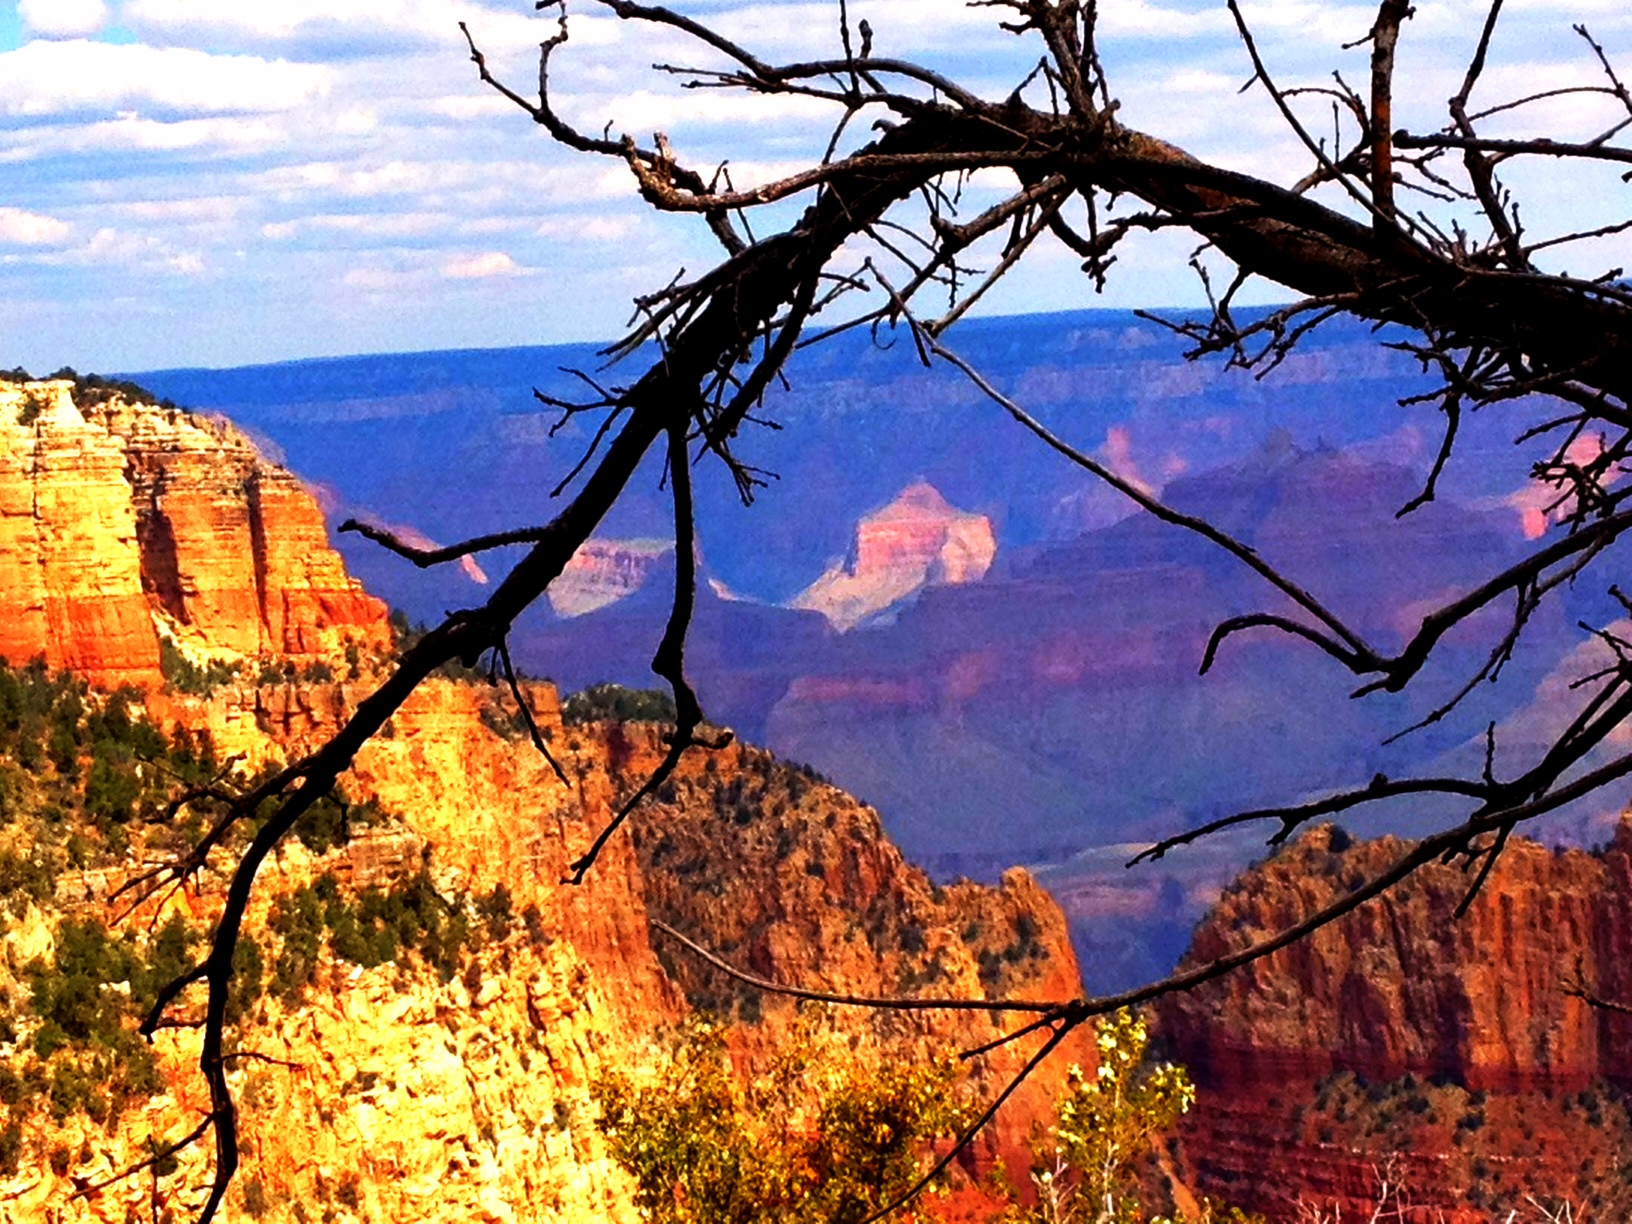 Photo of the Grand Canyon